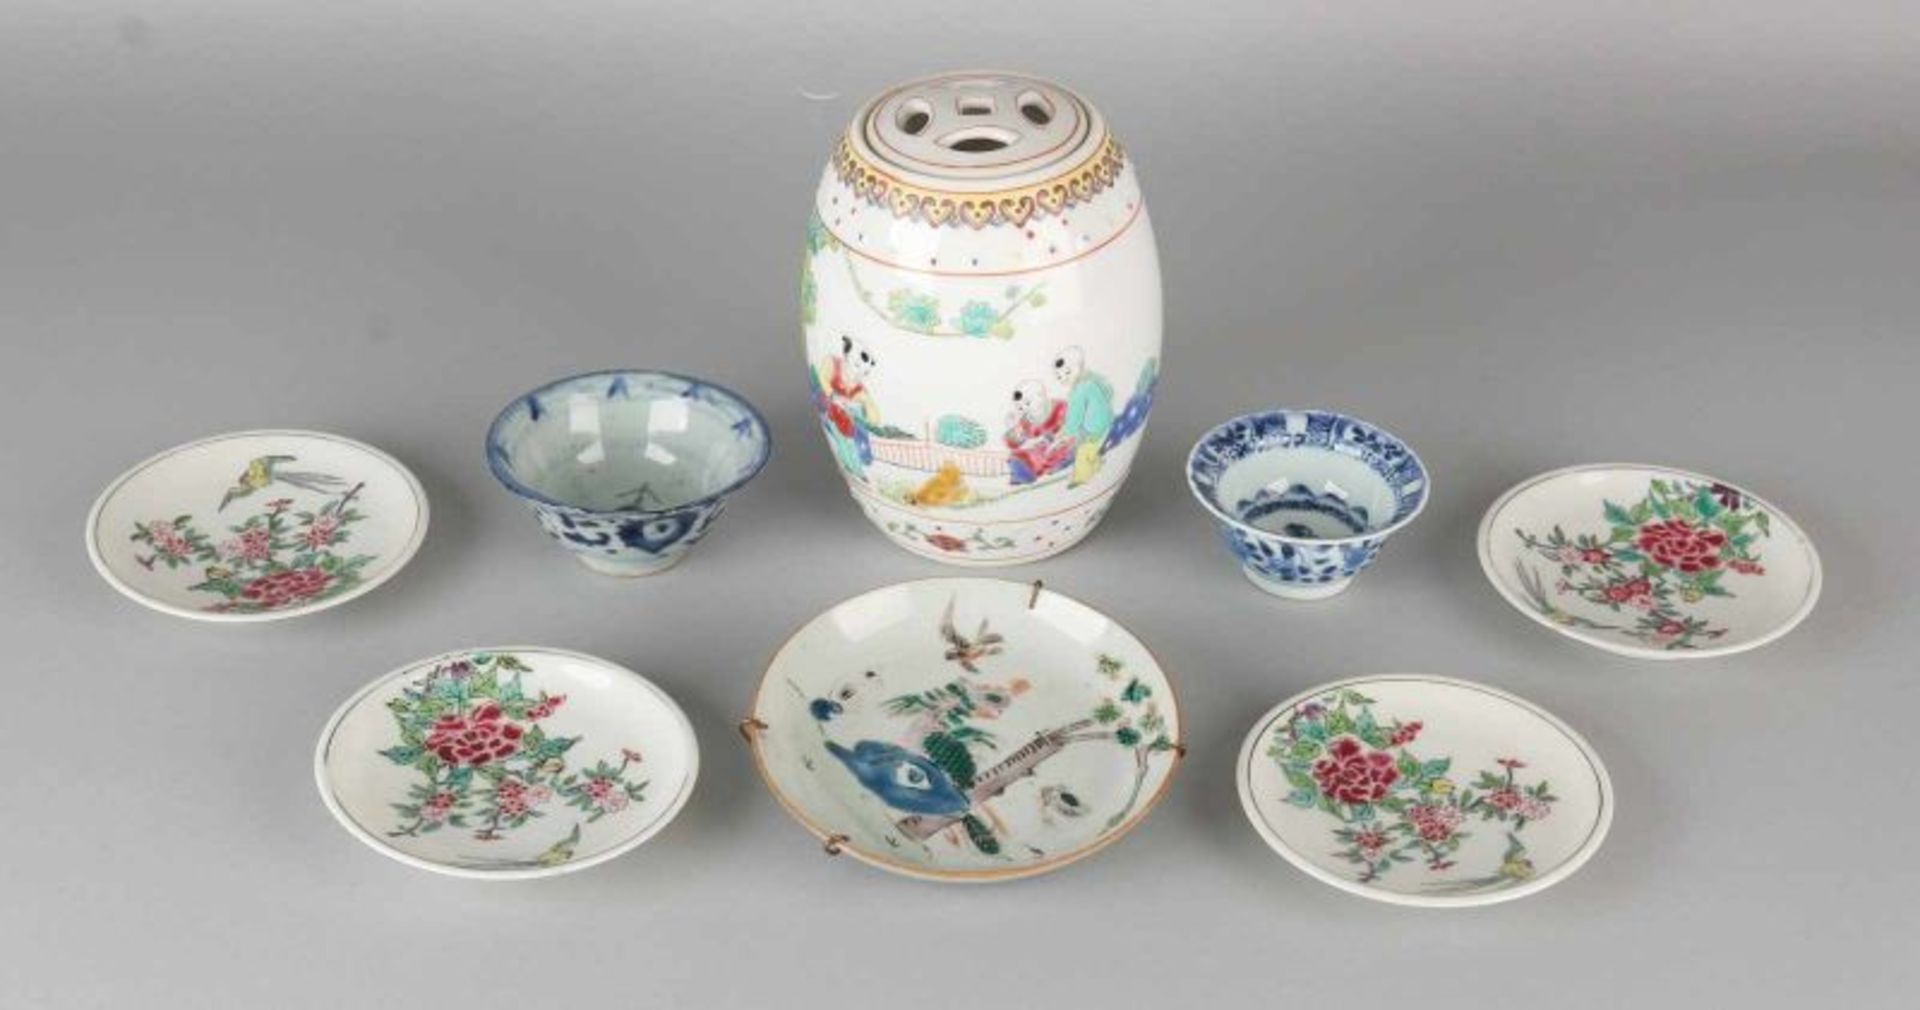 Eight times divers old / antique Chinese porcelain. 19th - 20th Century. Include: Four Family Rose